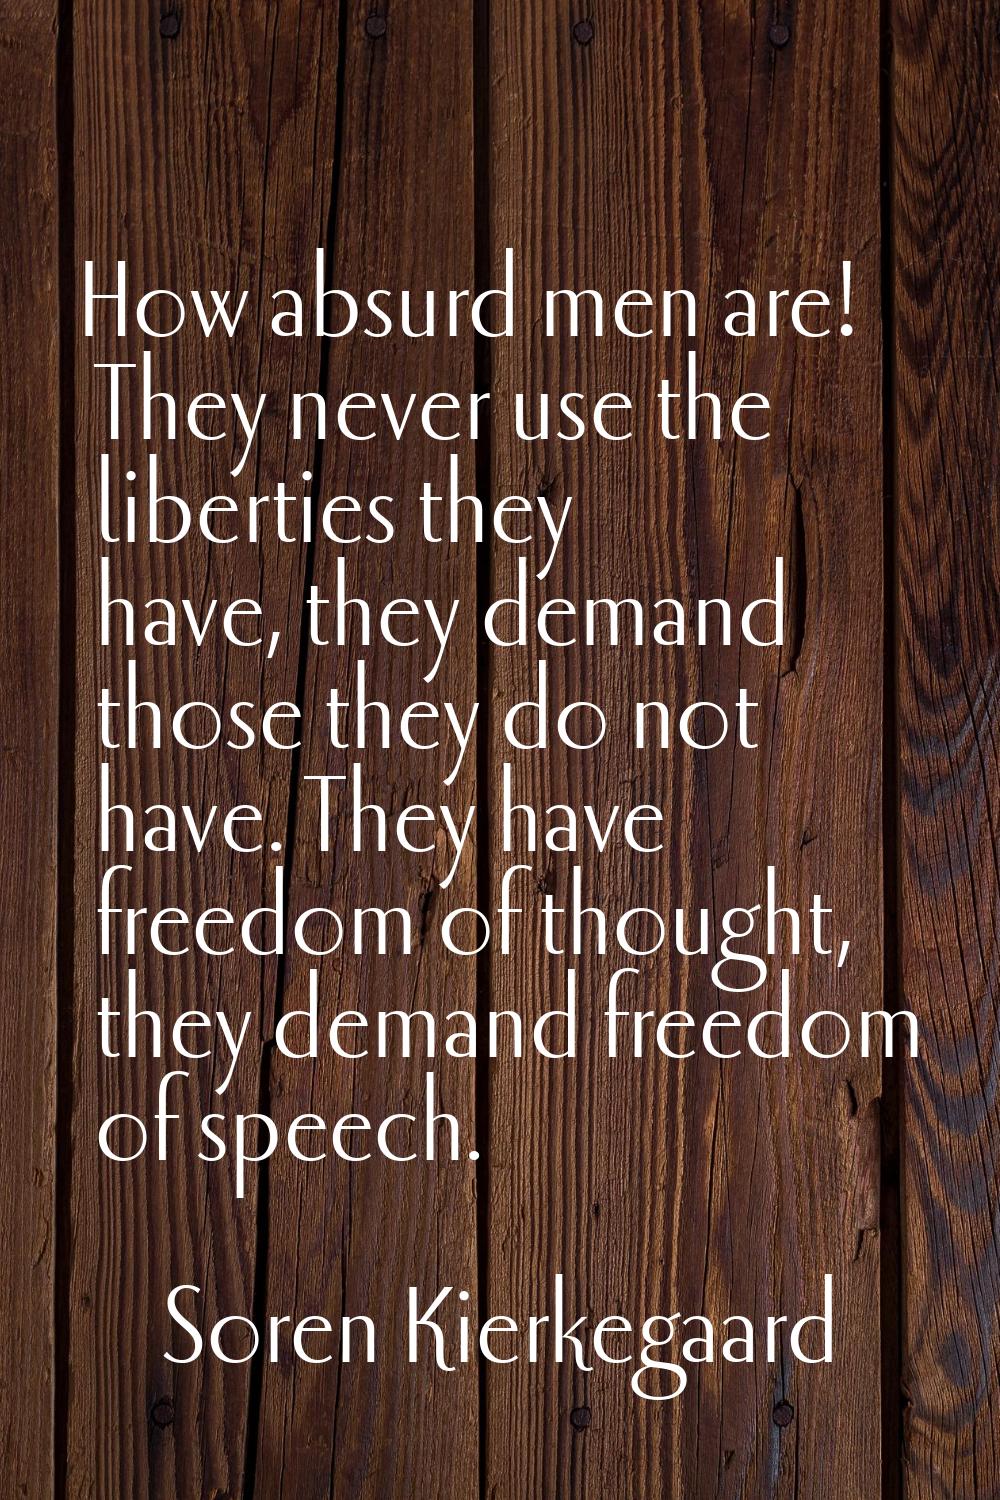 How absurd men are! They never use the liberties they have, they demand those they do not have. The